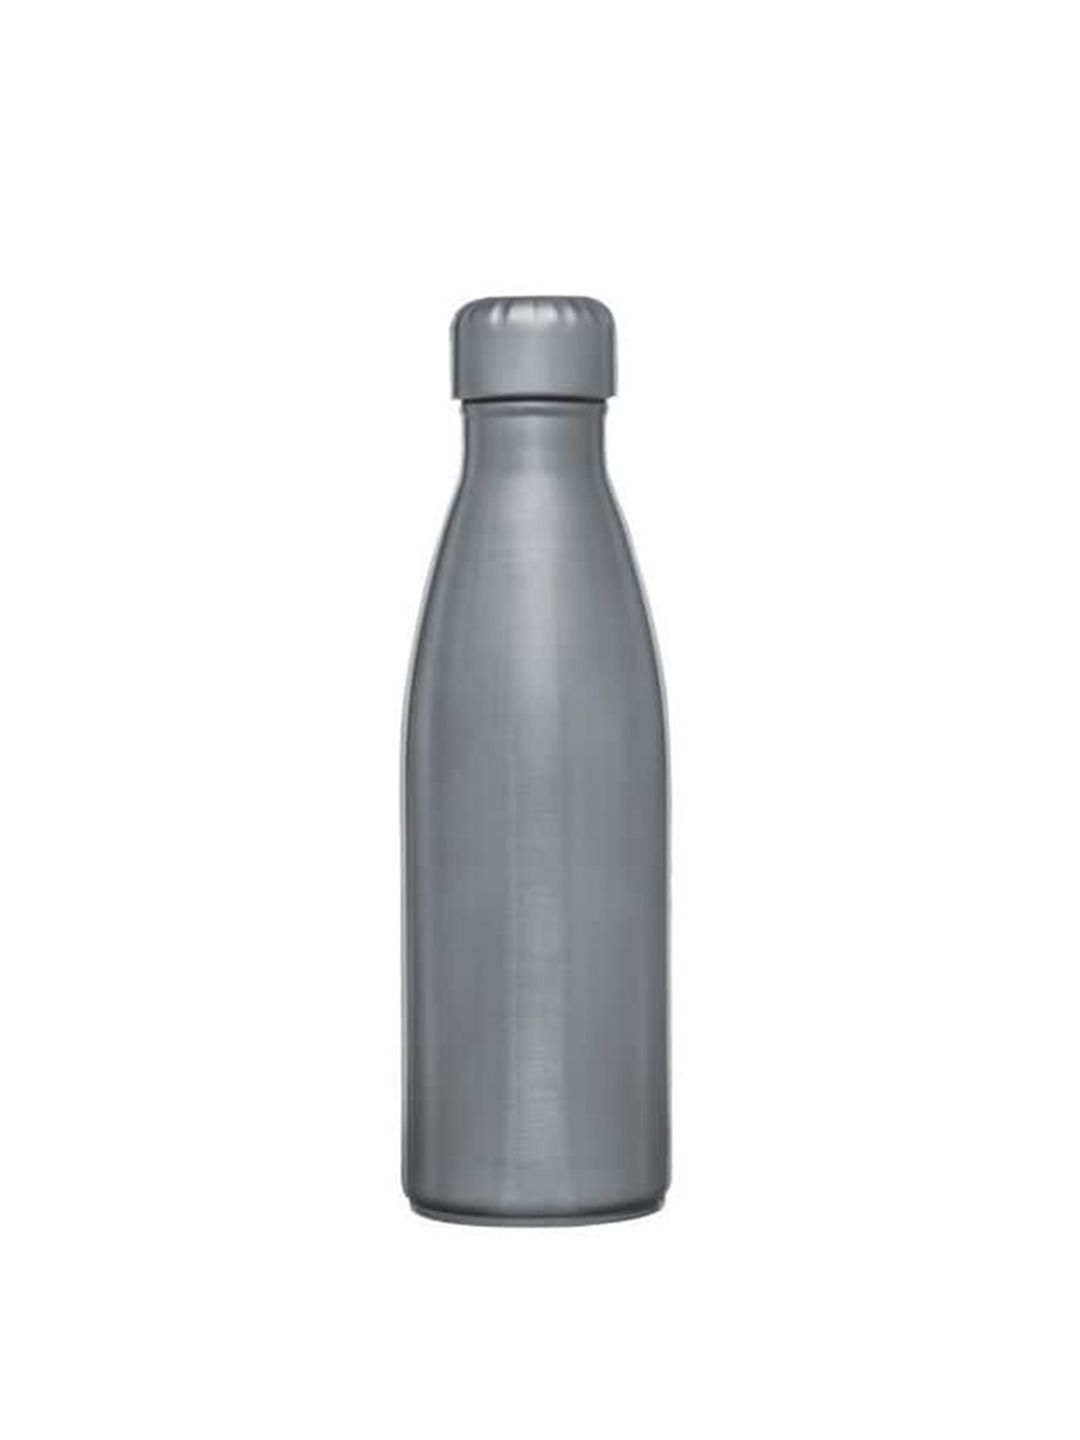 SignoraWare Silver-toned Solid Water Bottle 700 Ml Price in India